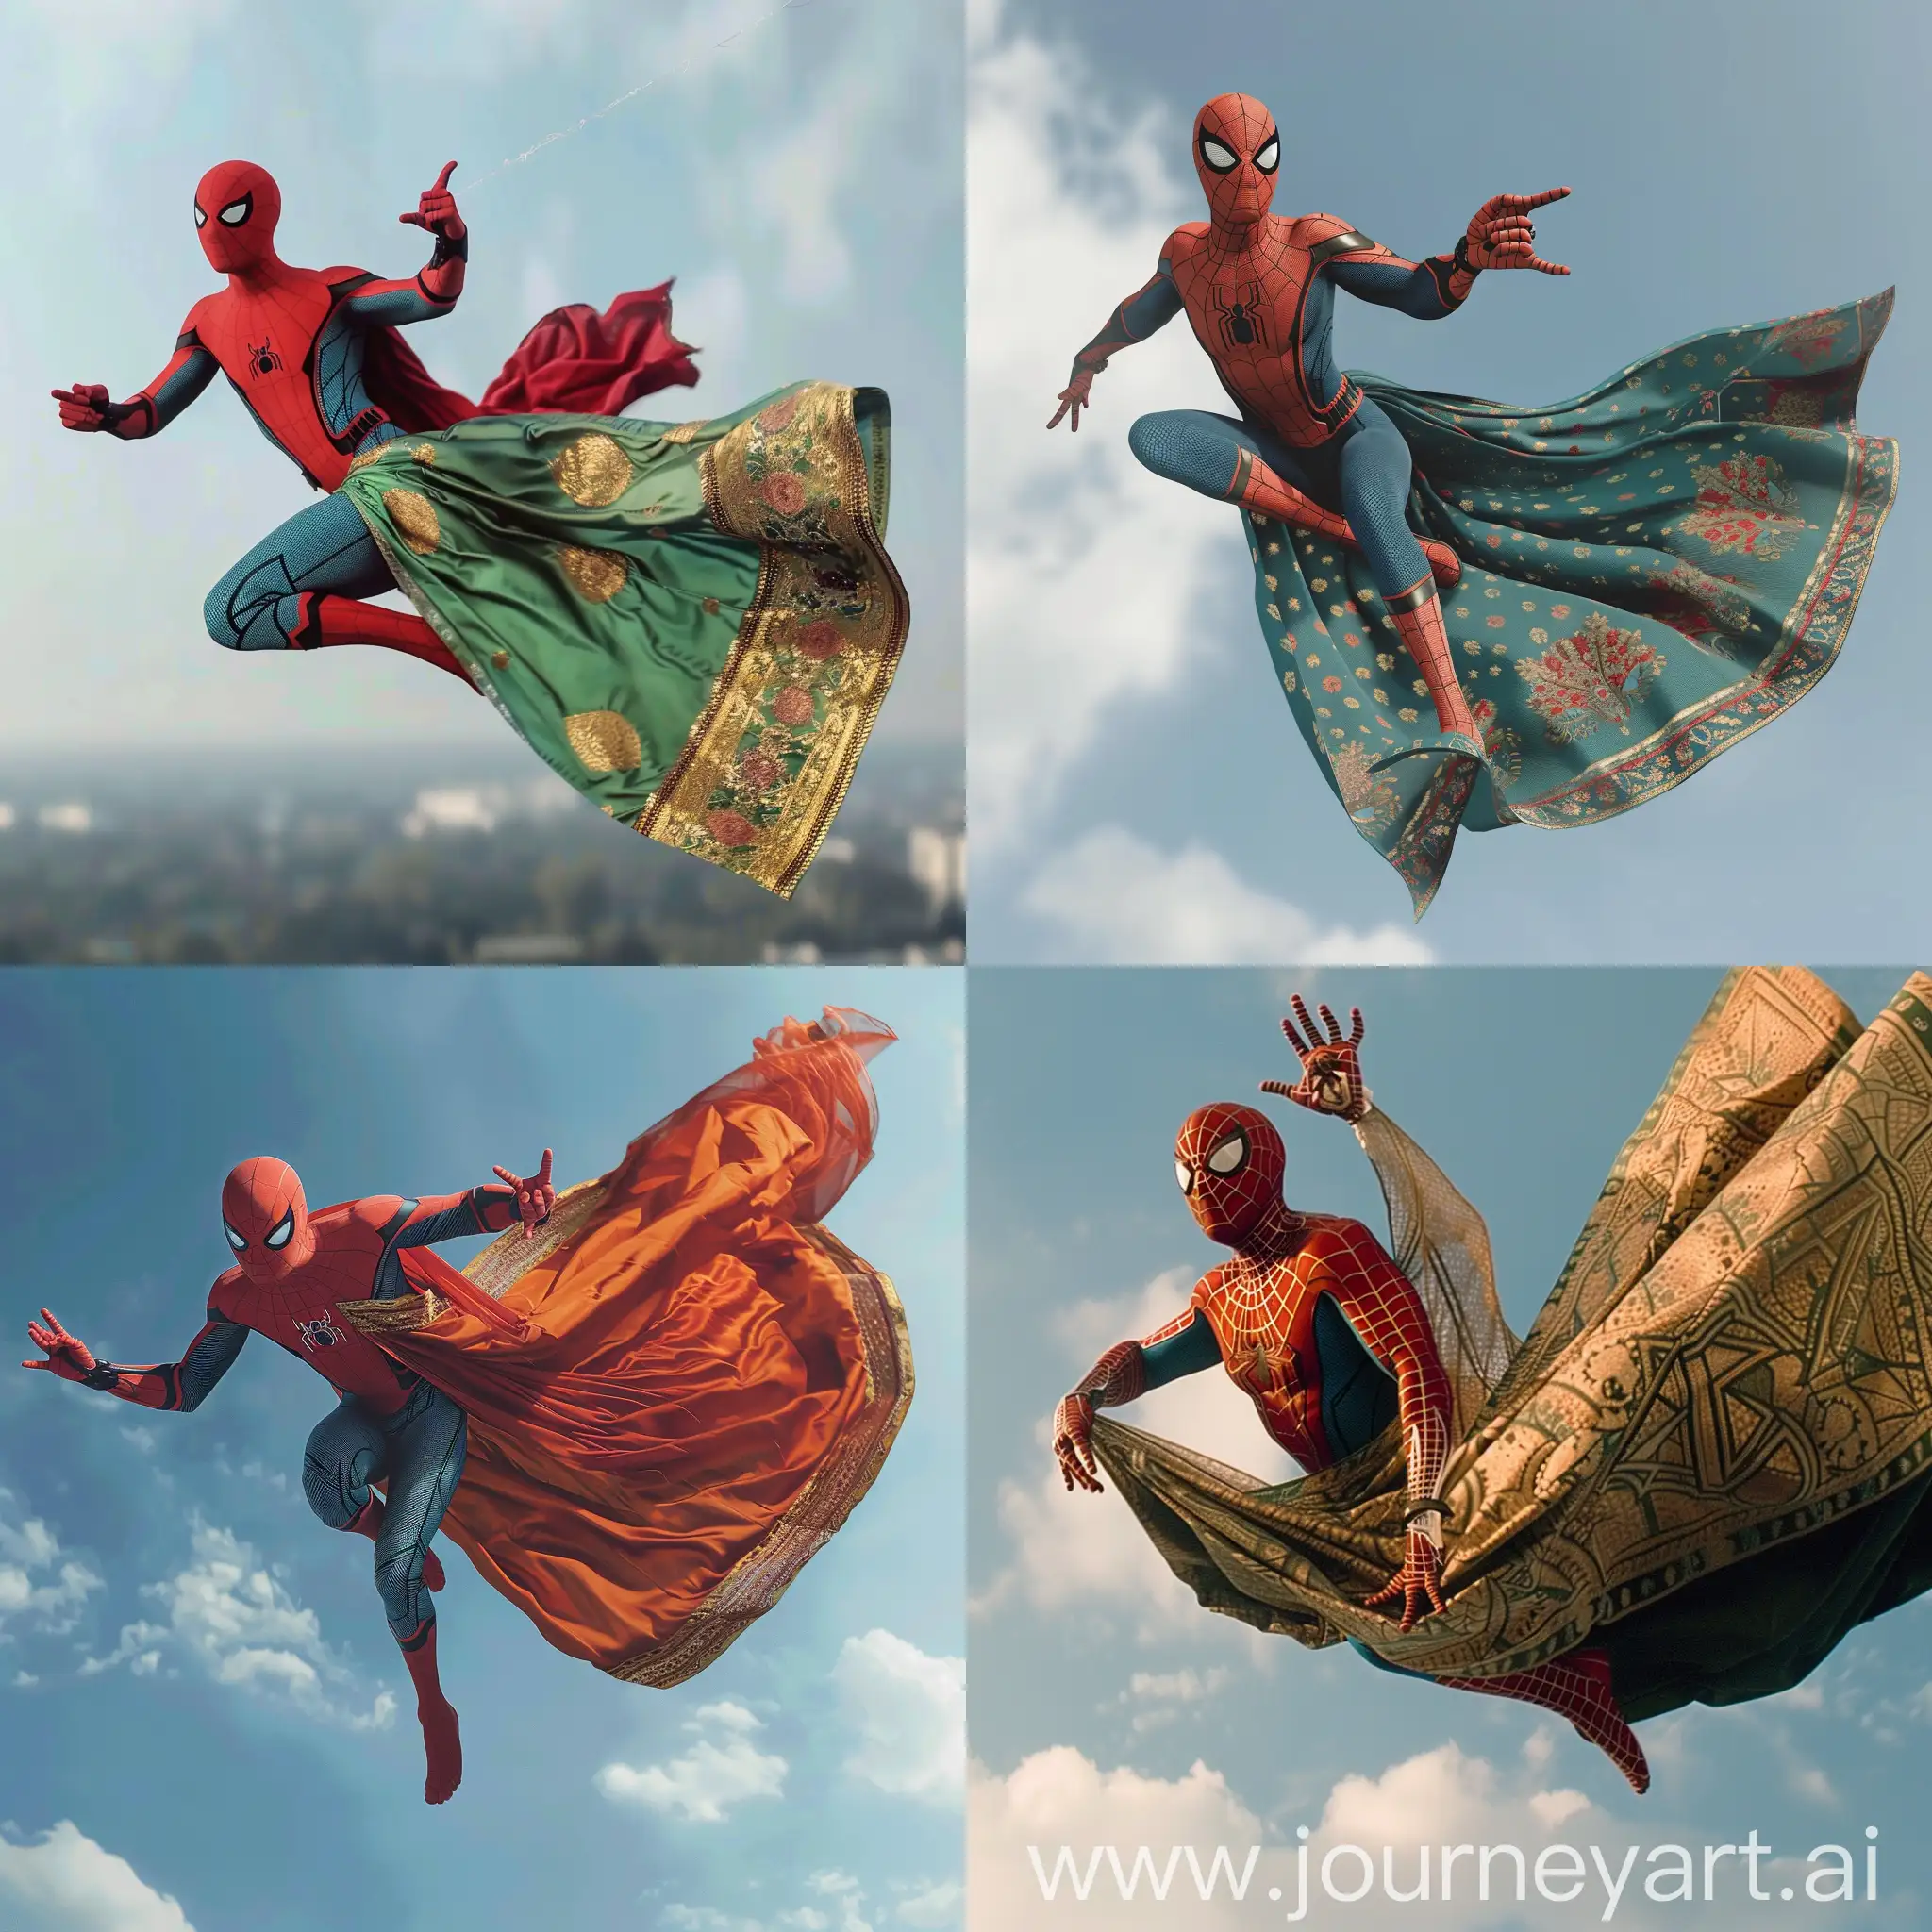 Spiderman-Soars-Through-the-Sky-in-Traditional-Saree-Costume